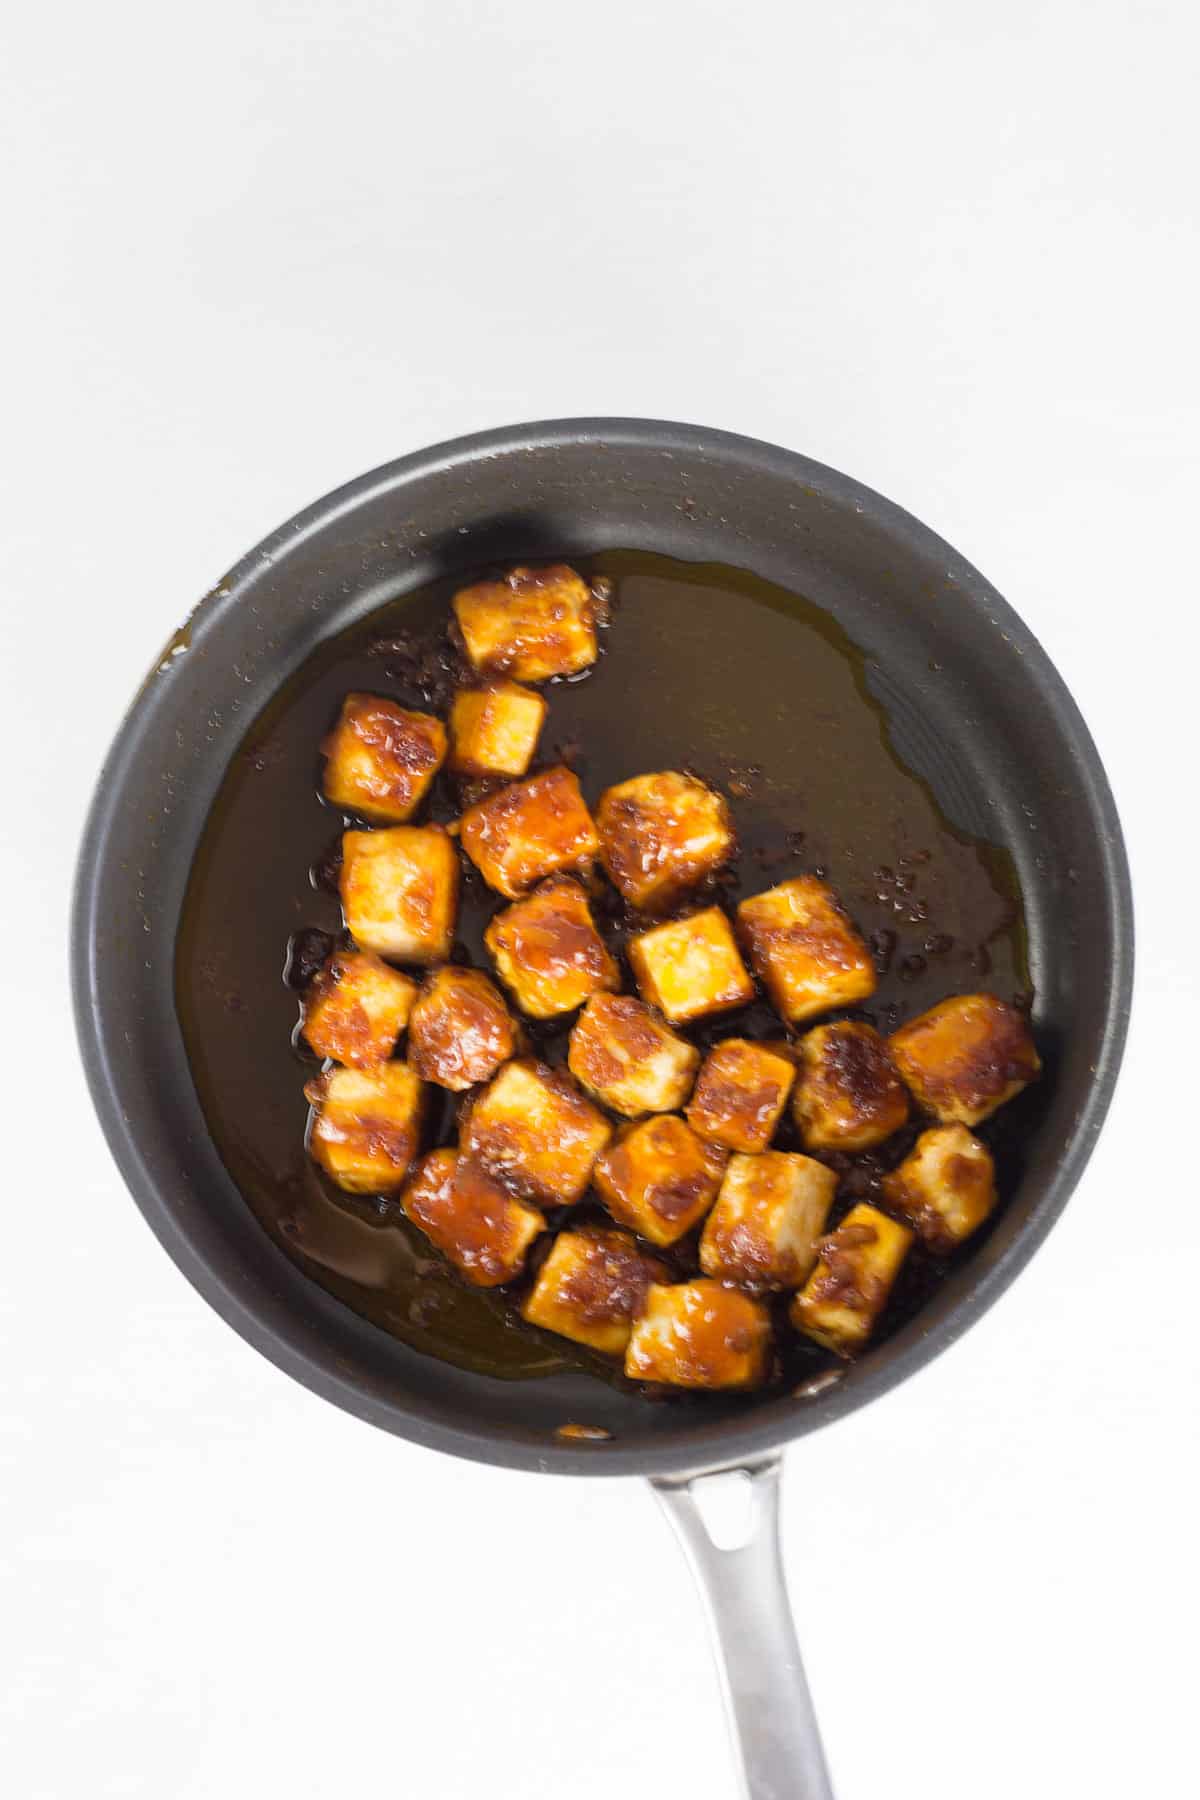 Coated tofu being cooked in sauce in black pan.